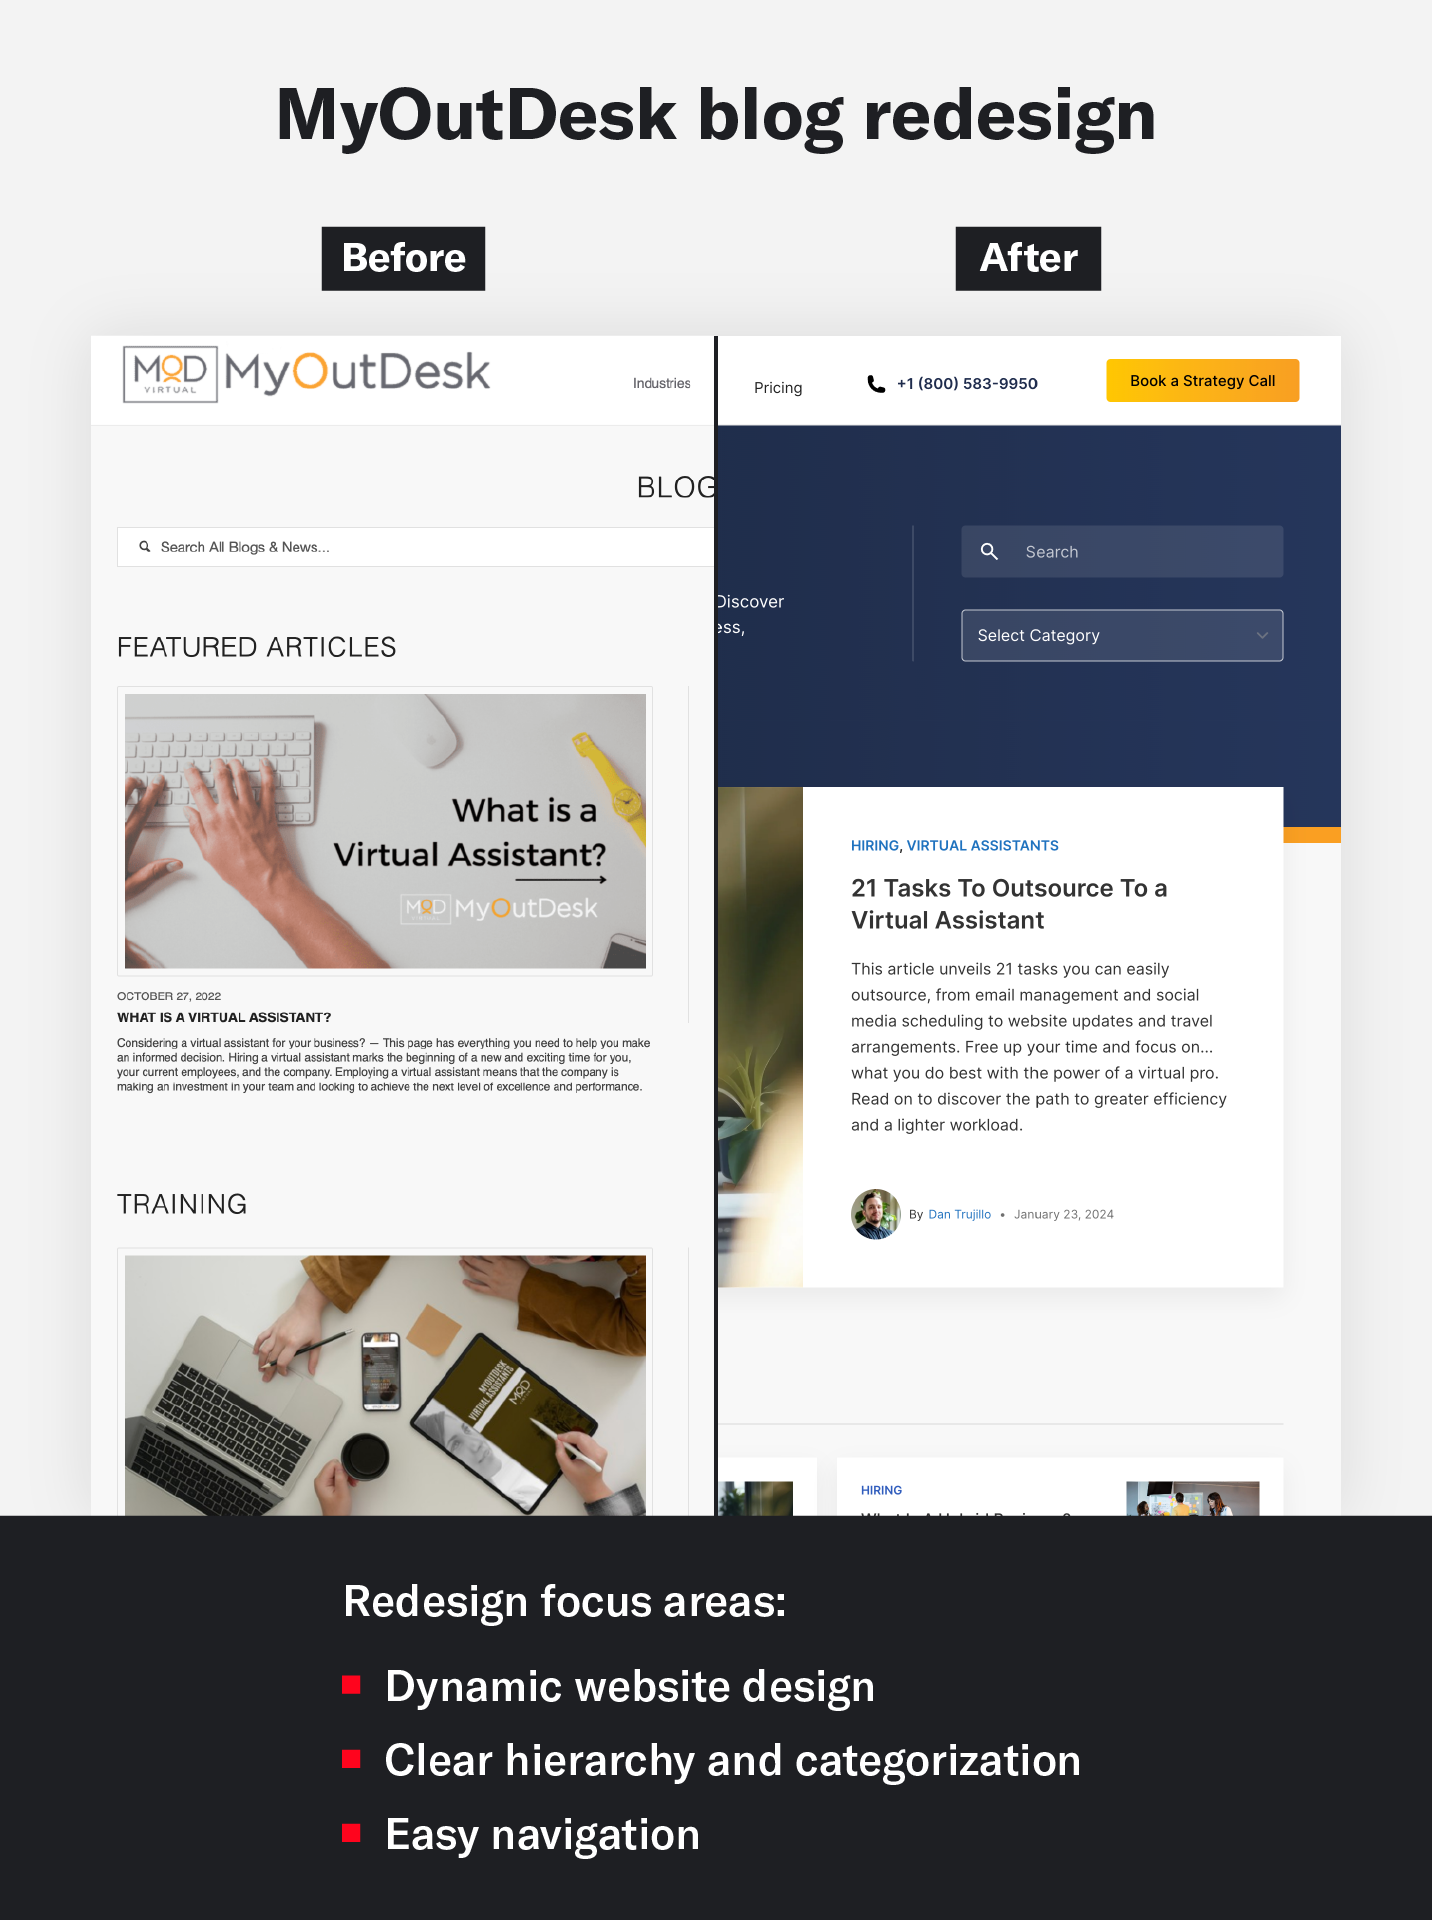 A comparison picture of the before and after of the MyOutDesk blog page redesign.